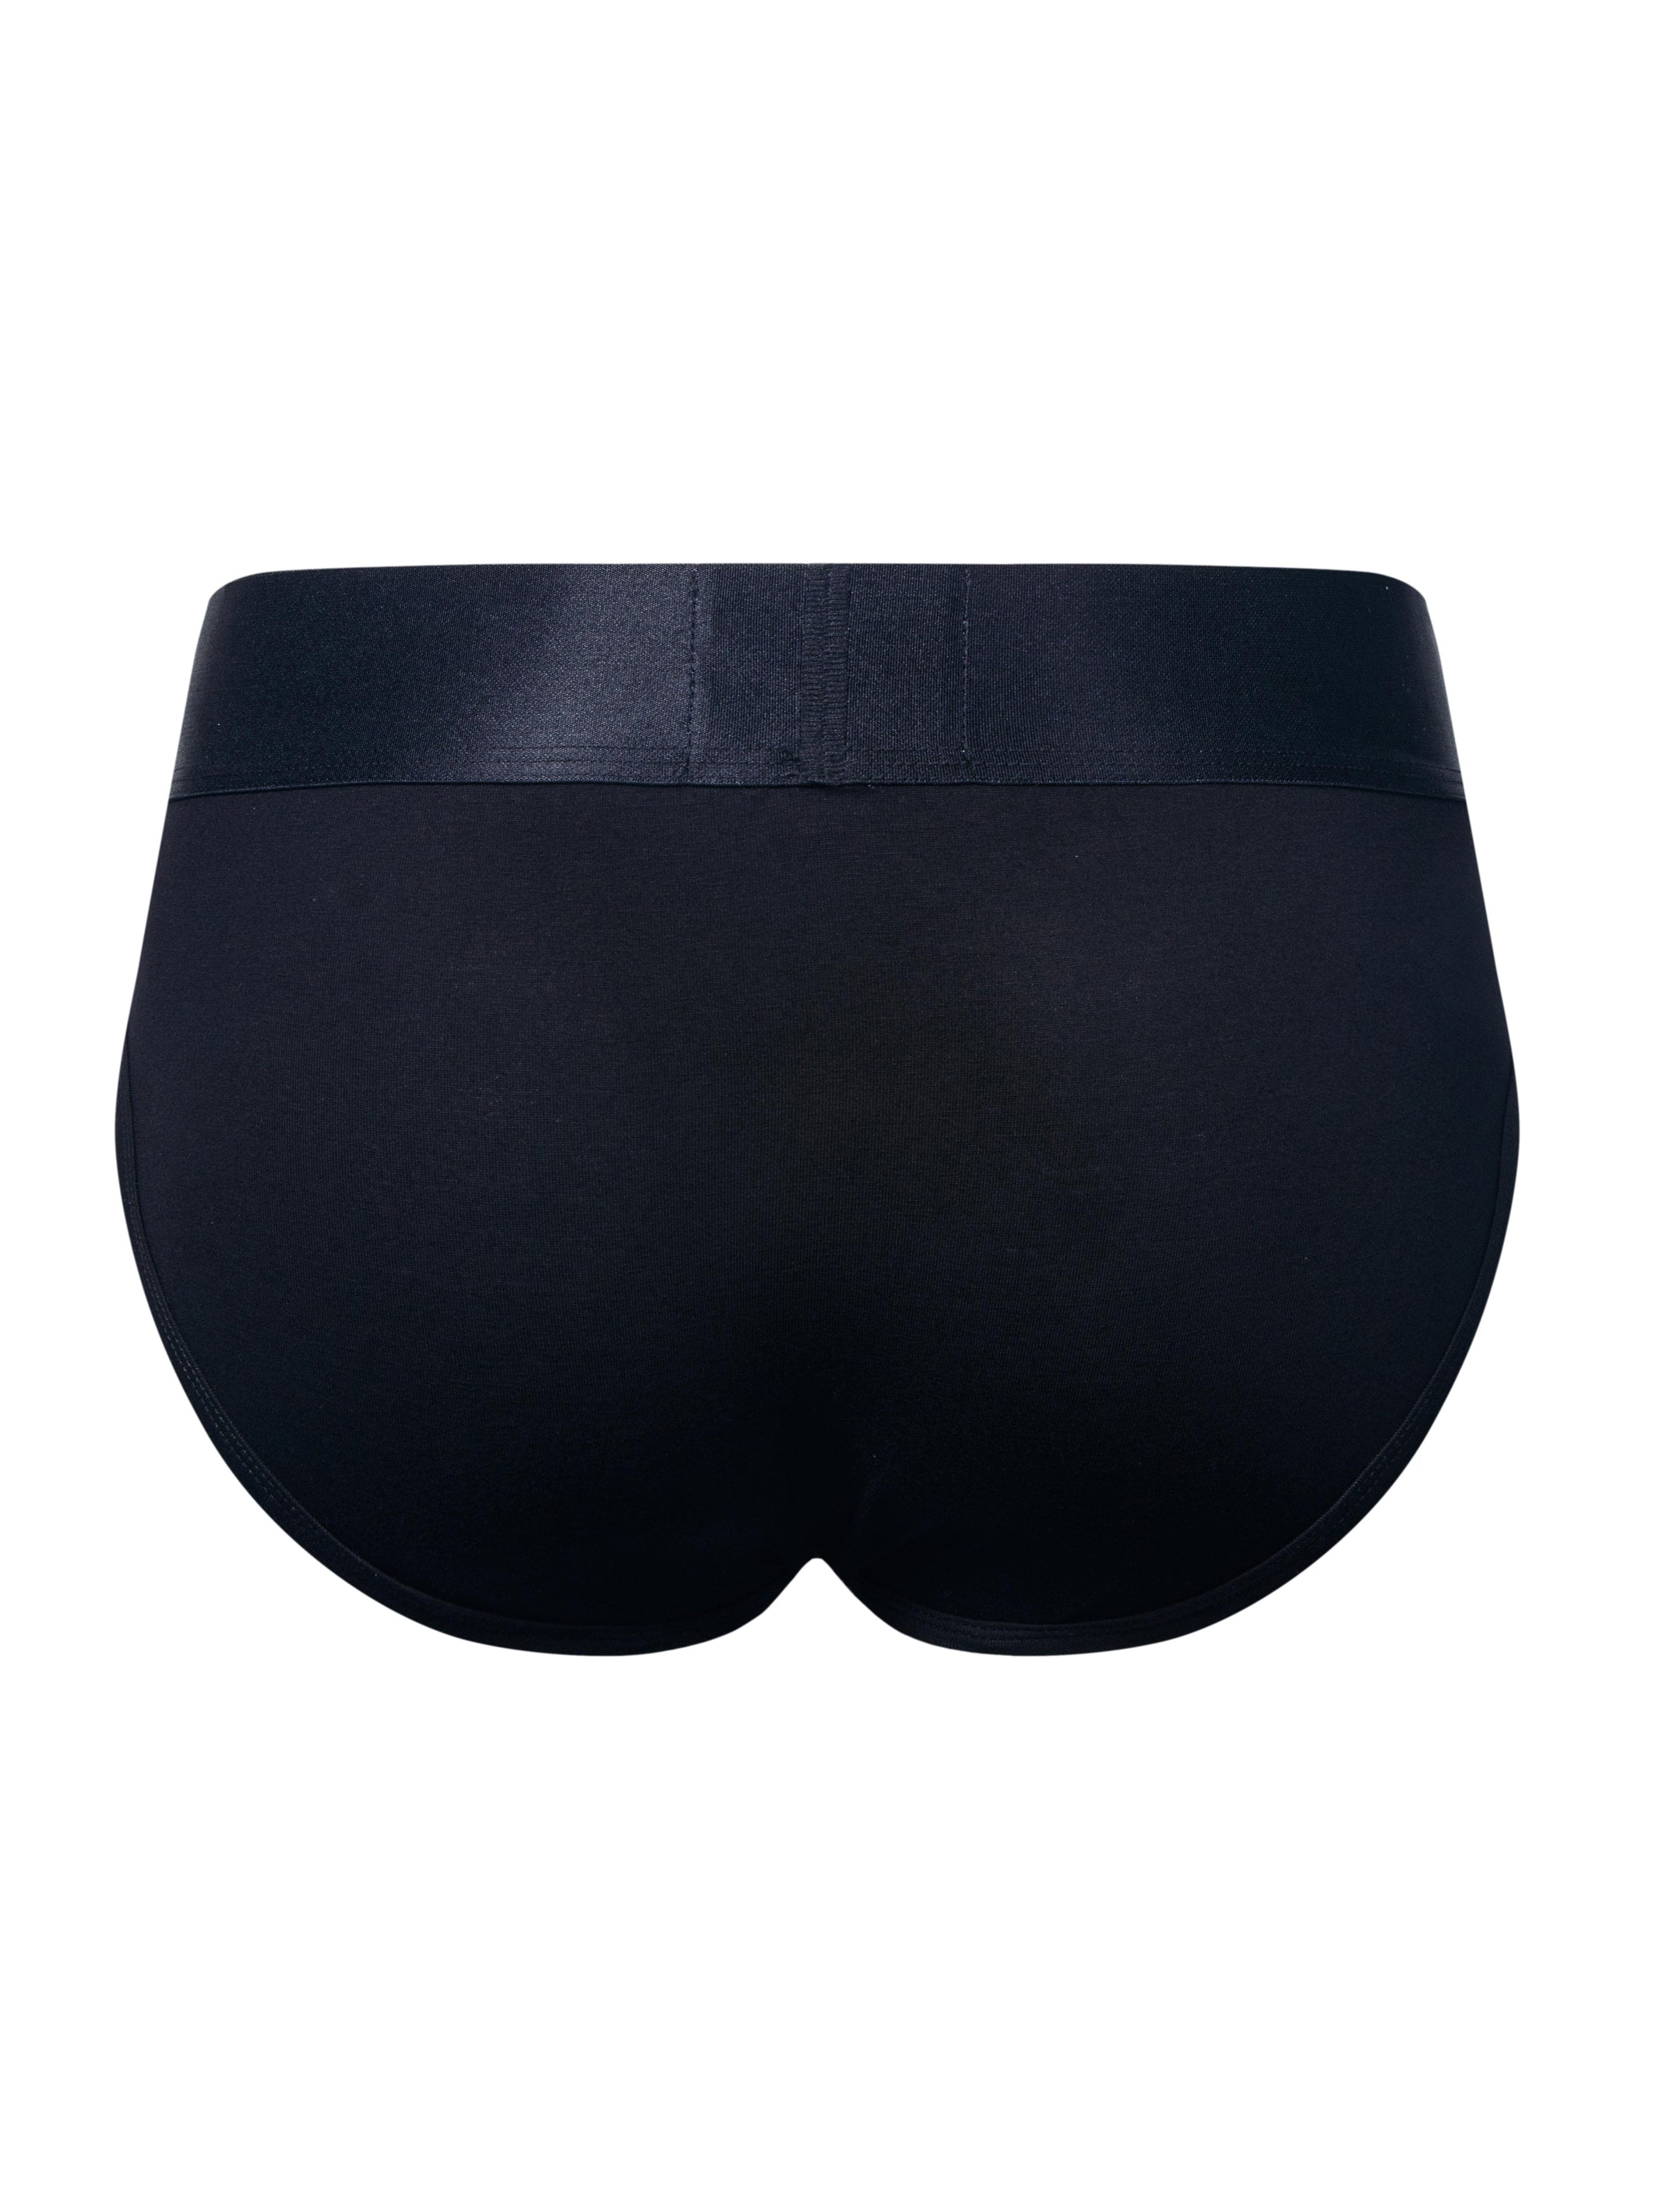 A product photo of the back of a pair of black Phantom Briefs.